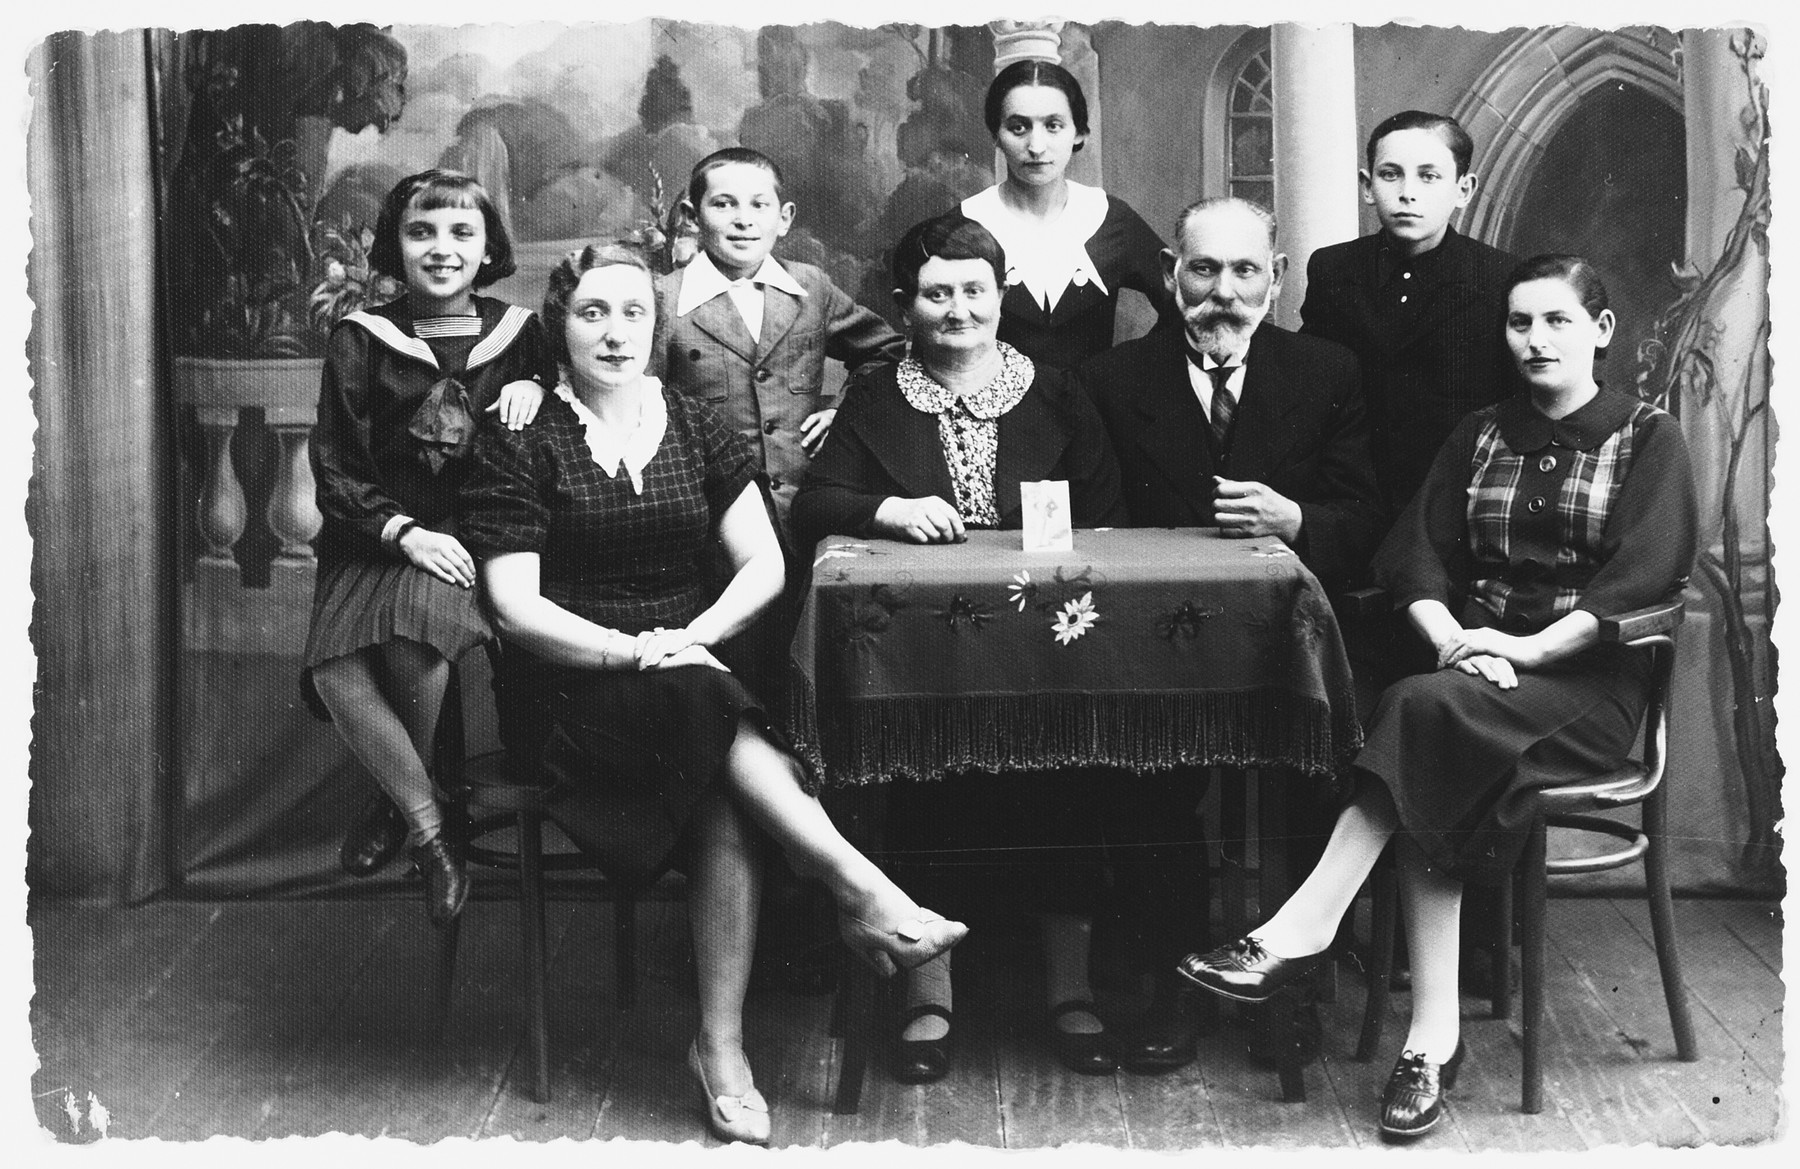 Prewar portrait of the Zisman family in Zelow, Poland.

Pictured seated in front, second from the right, is Zysman Kifer.  Also in the front row (left to right) are (probably) Chana Faiga (daughter of Zysman), Hena Brand (sister-in-law to Zysman and a midwife), and Hinda (daughter of Zysman,seated on the far right).  Pictured in the back row (left to right) are Esther Gitel Yacobovitch, her brother Avraham Shumel Yacobovitch, [unidentified], and probably Shlomo Yacobovitch.

Hena was well known for serving as a midwife to lower income families.  She did not charge them a fee, and often brought clothing for the newborns and their families.

Zysman Kifer died in 1941 in Chelmno.  Esther, Avraham, and Hinda also perished in Chelmno.  Shlomo survived.